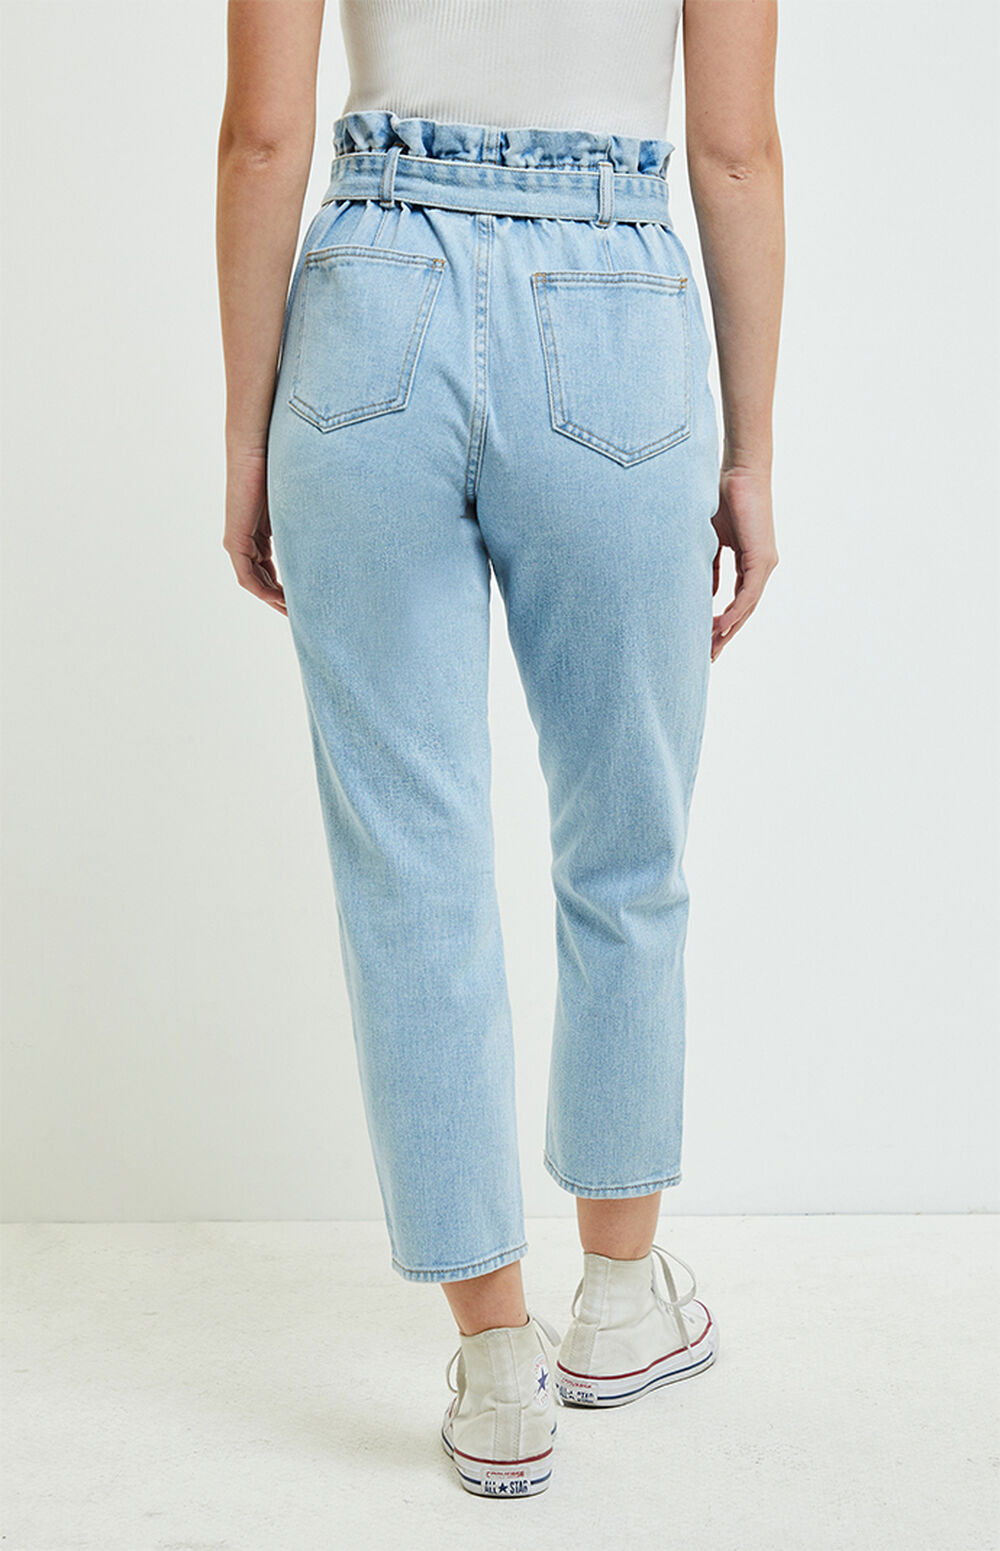 PacSun Smocked Belted Mom Jeans | PacSun